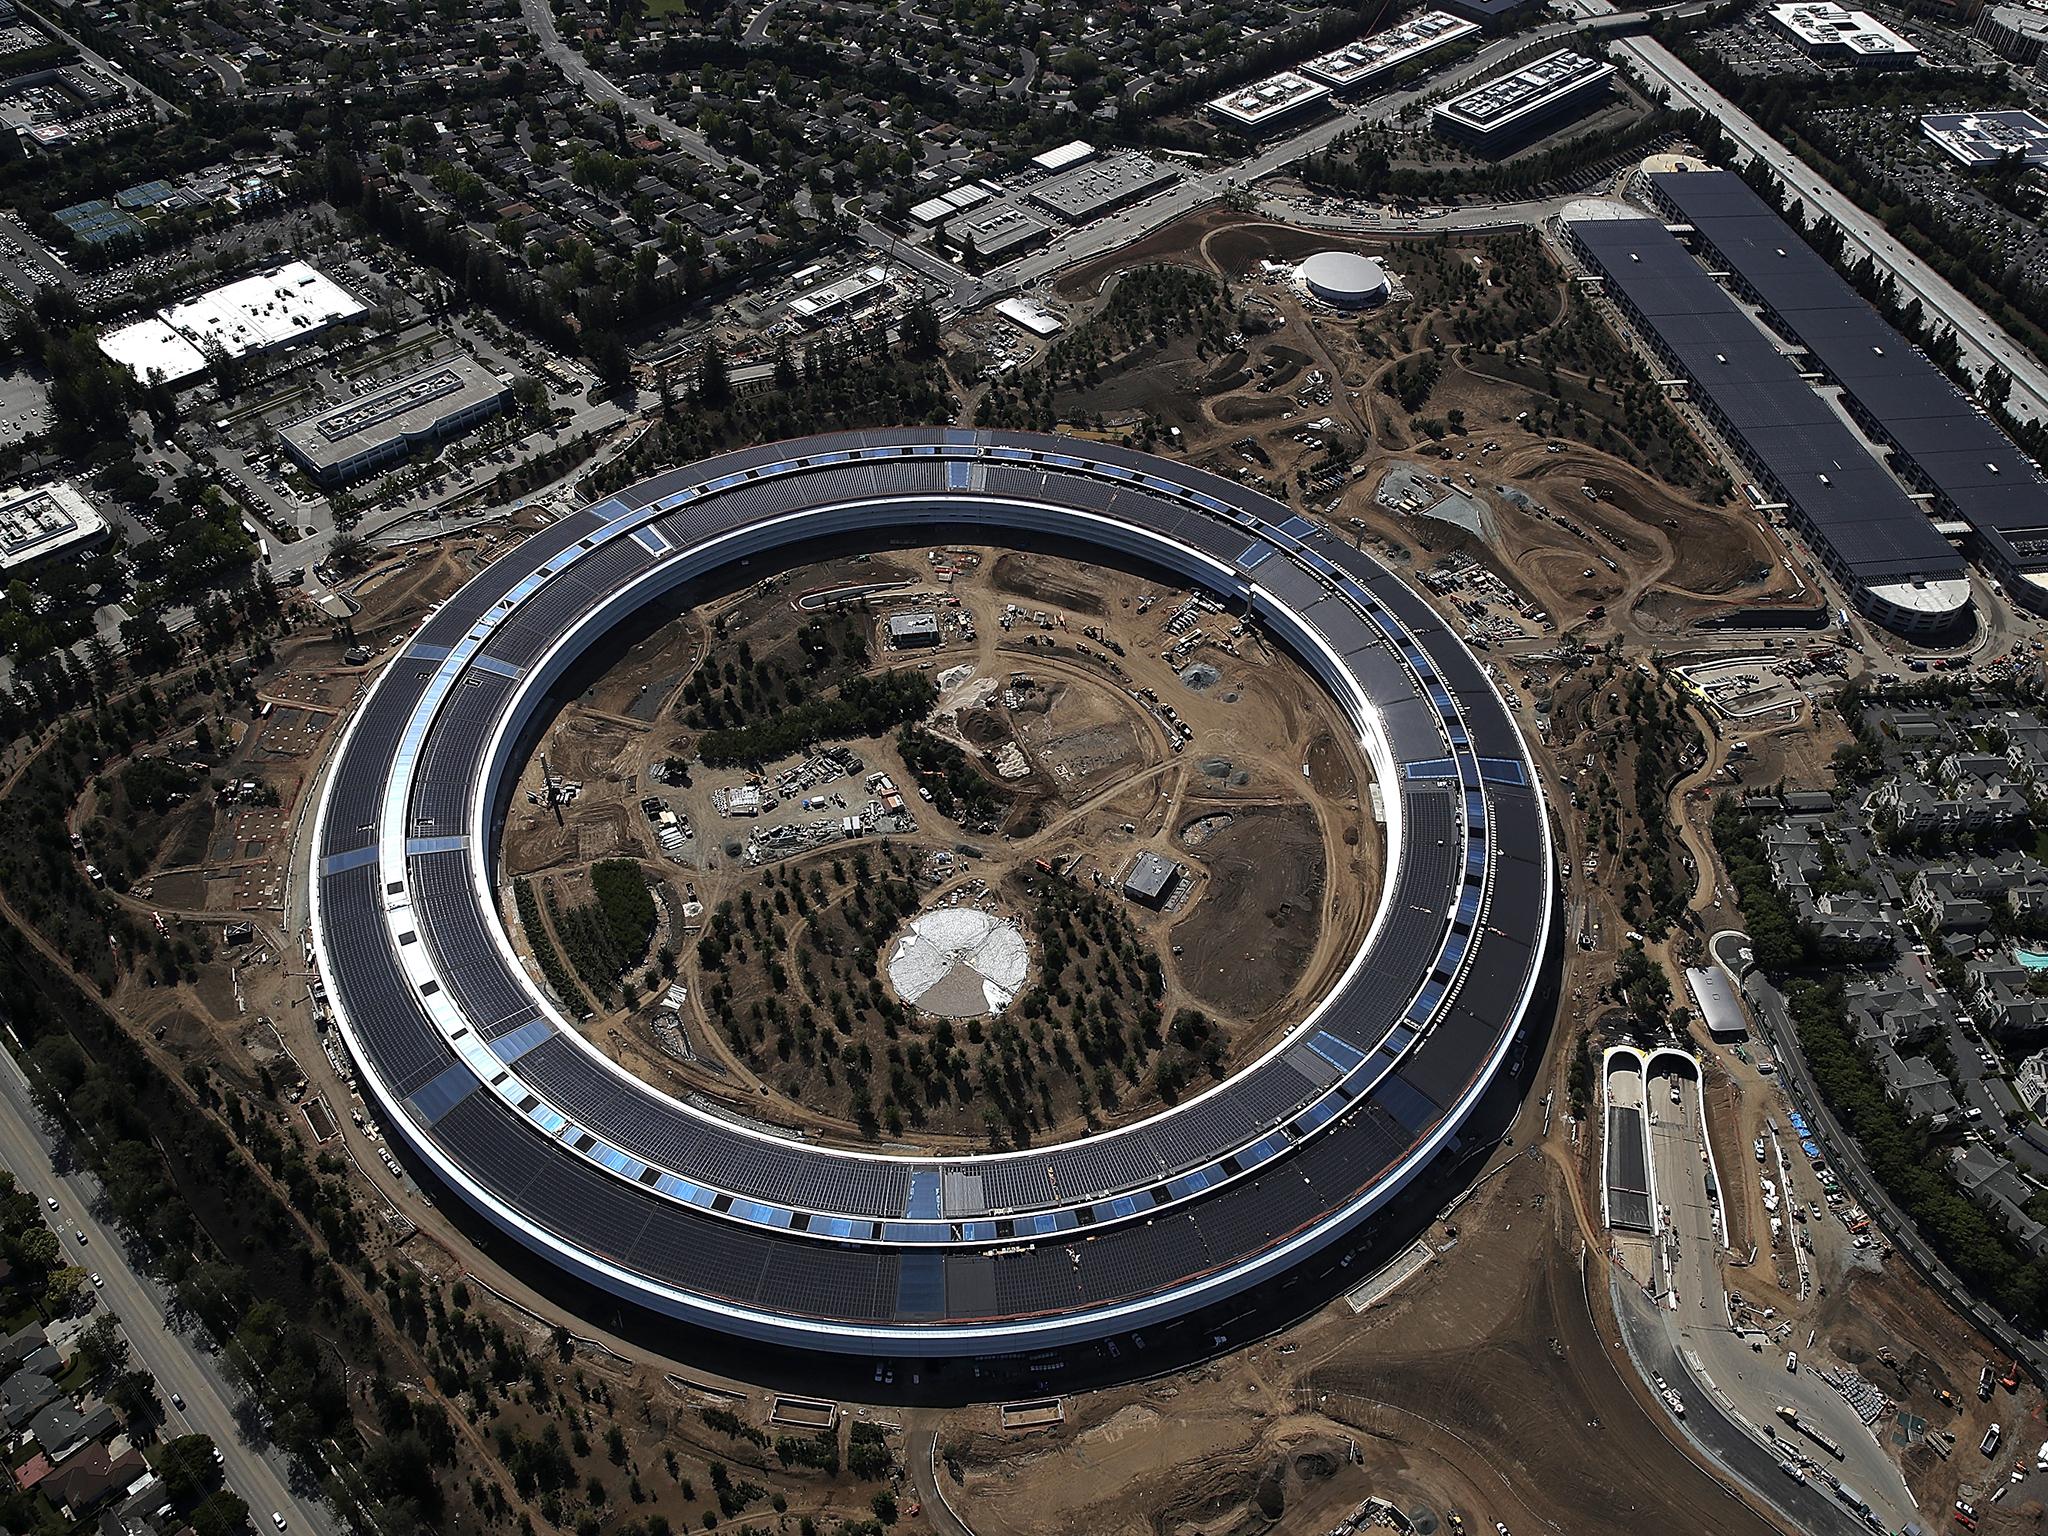 Apple Park, the new headquarters in Cupertino designed by Lord Norman Foster, cost roughly $5bn, and will house 13,000 employees when everyone has moved in